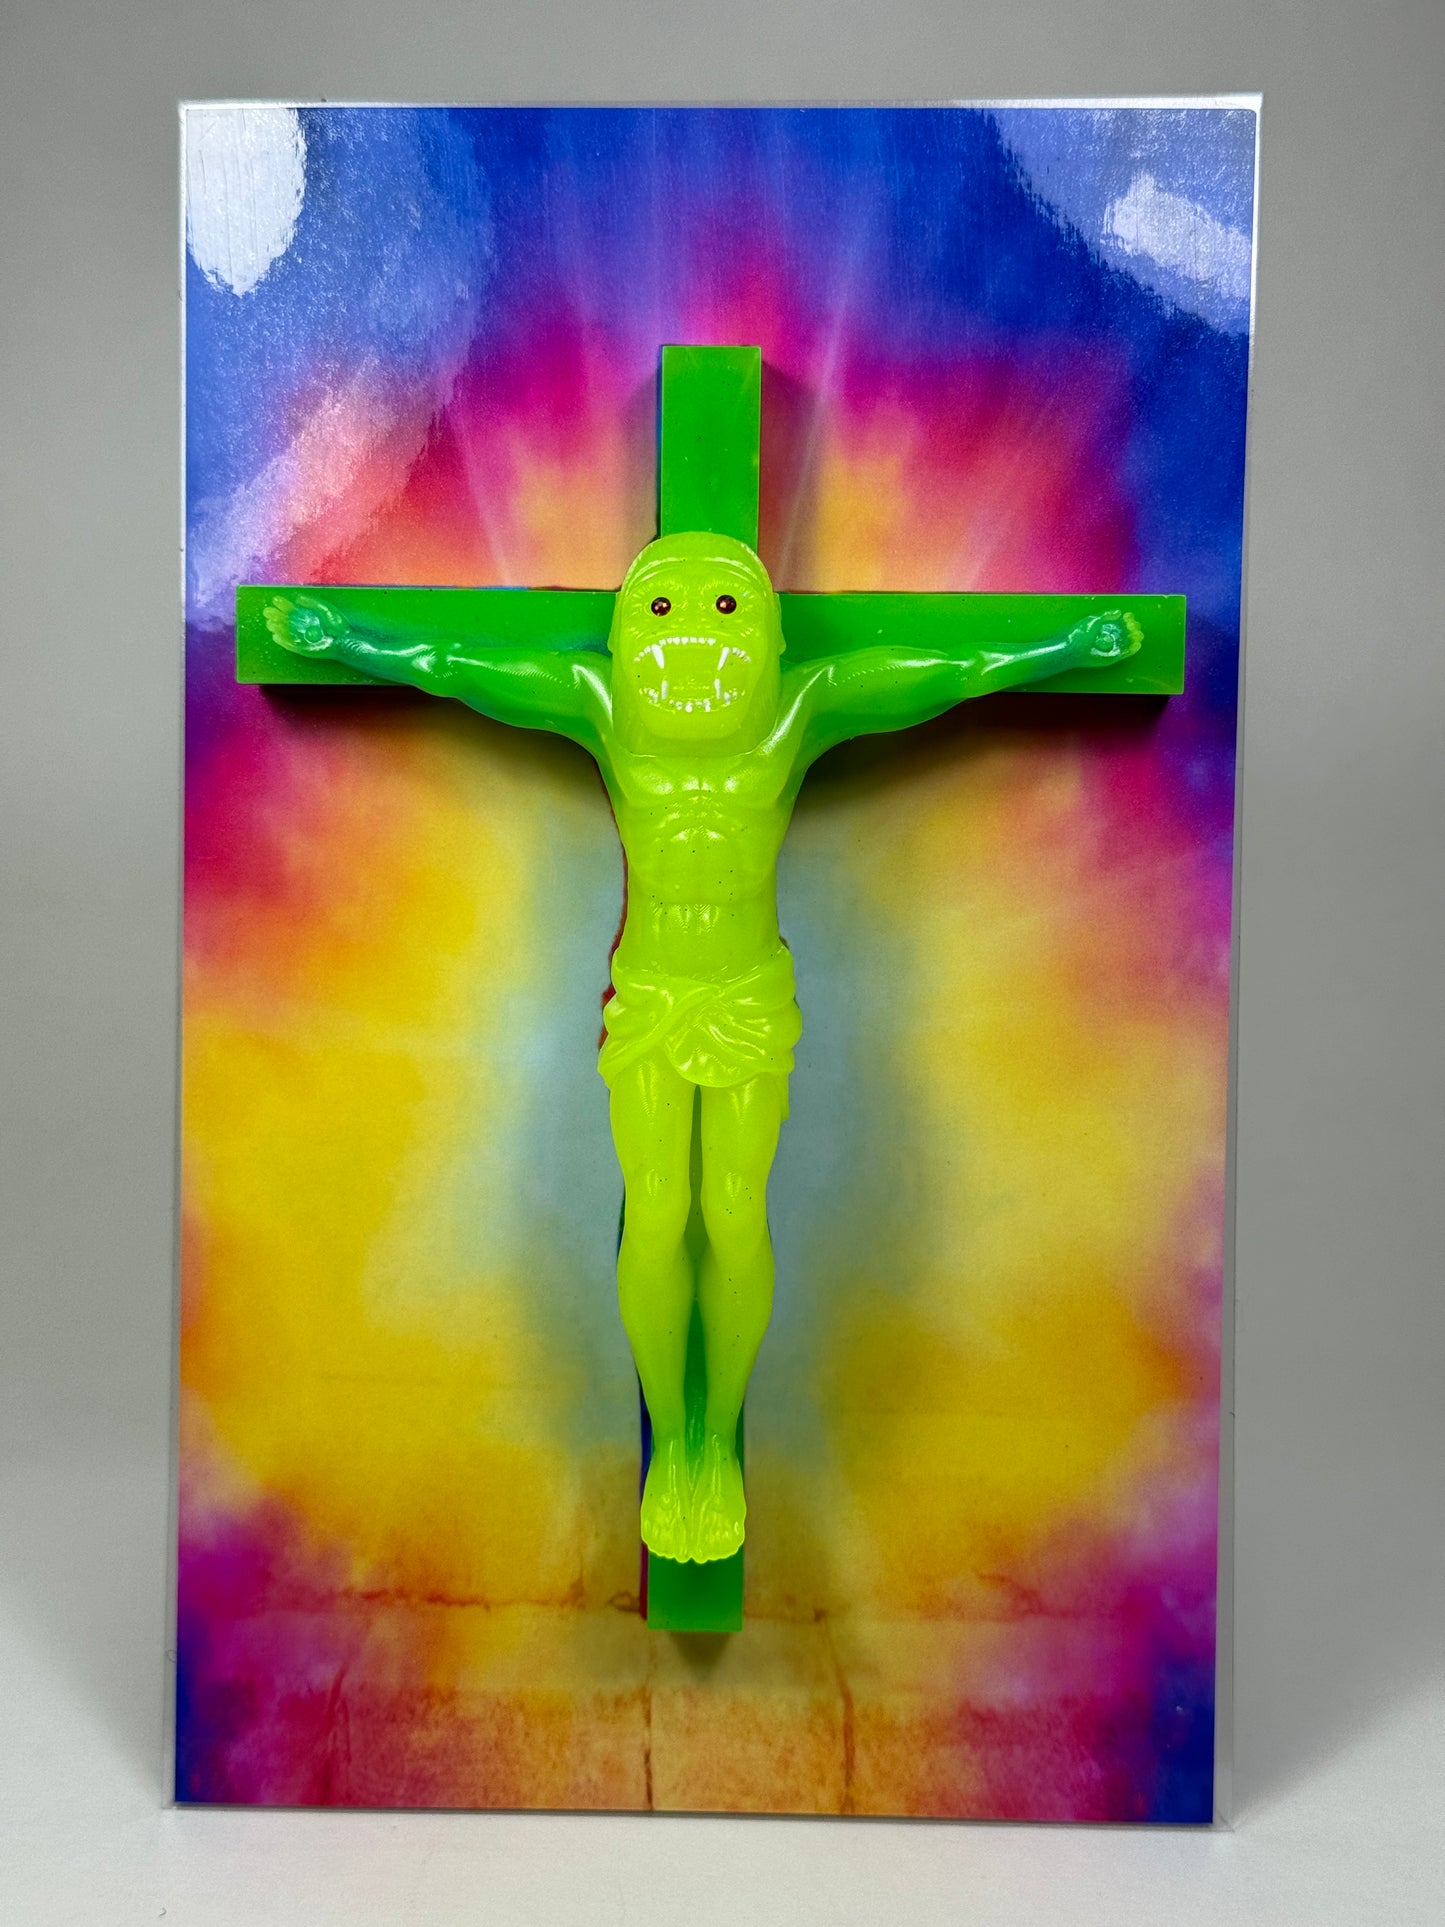 Christ on the Cross but he is an Ape, Magical Toy: Joy to You, Blessings from Space